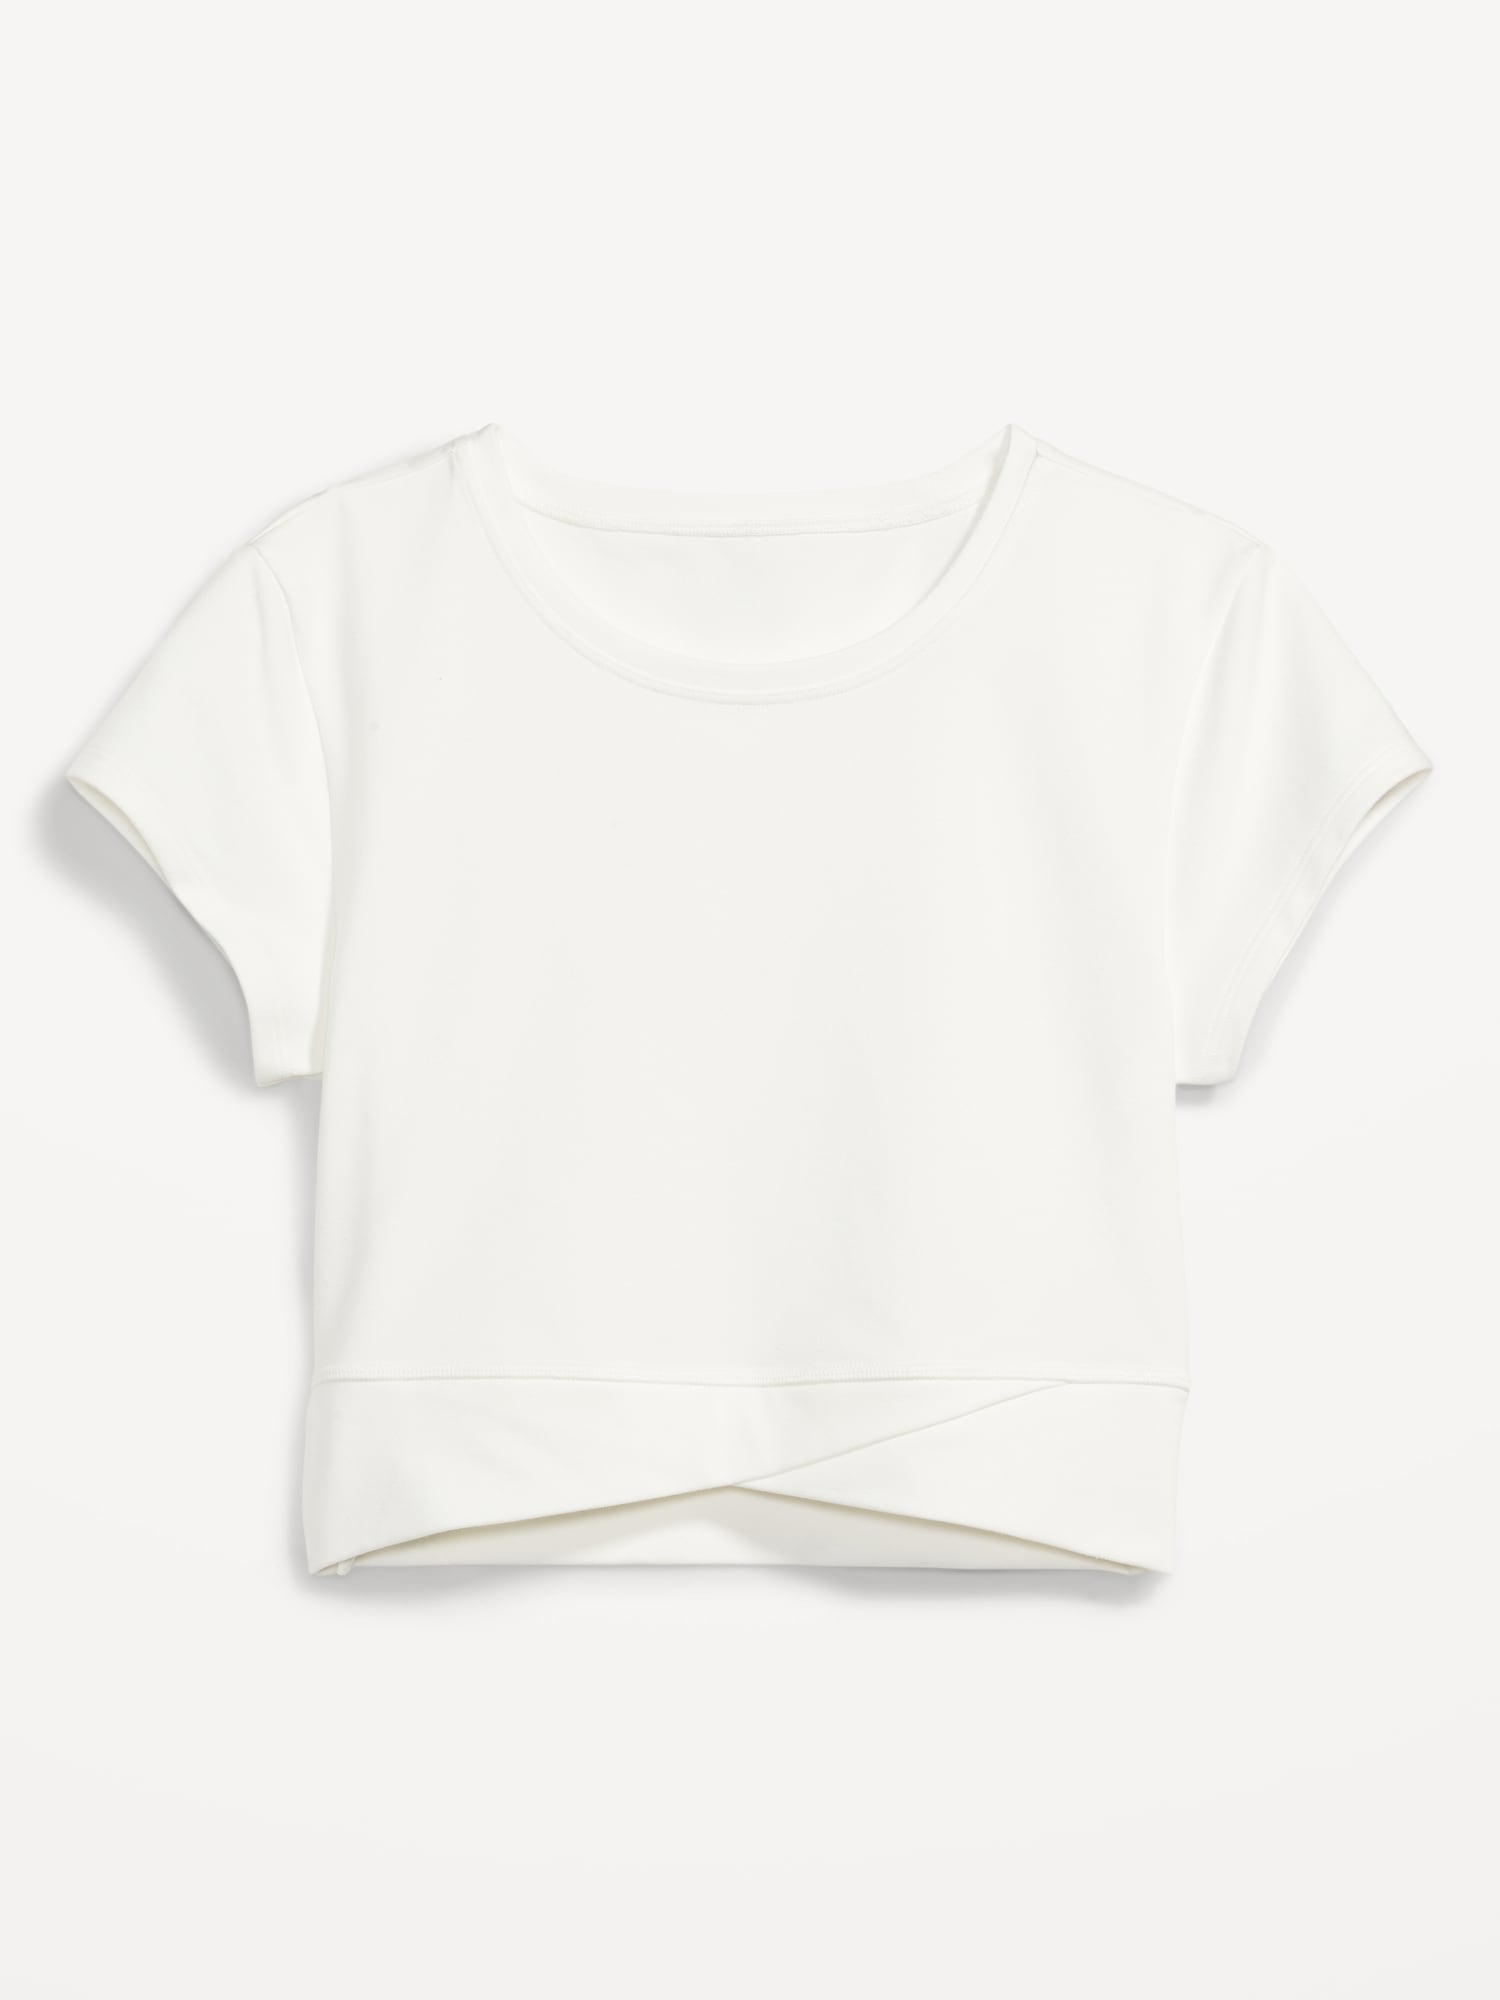 PowerChill Cropped Cross-Front Fitted T-Shirt for Women in Sea Salt White